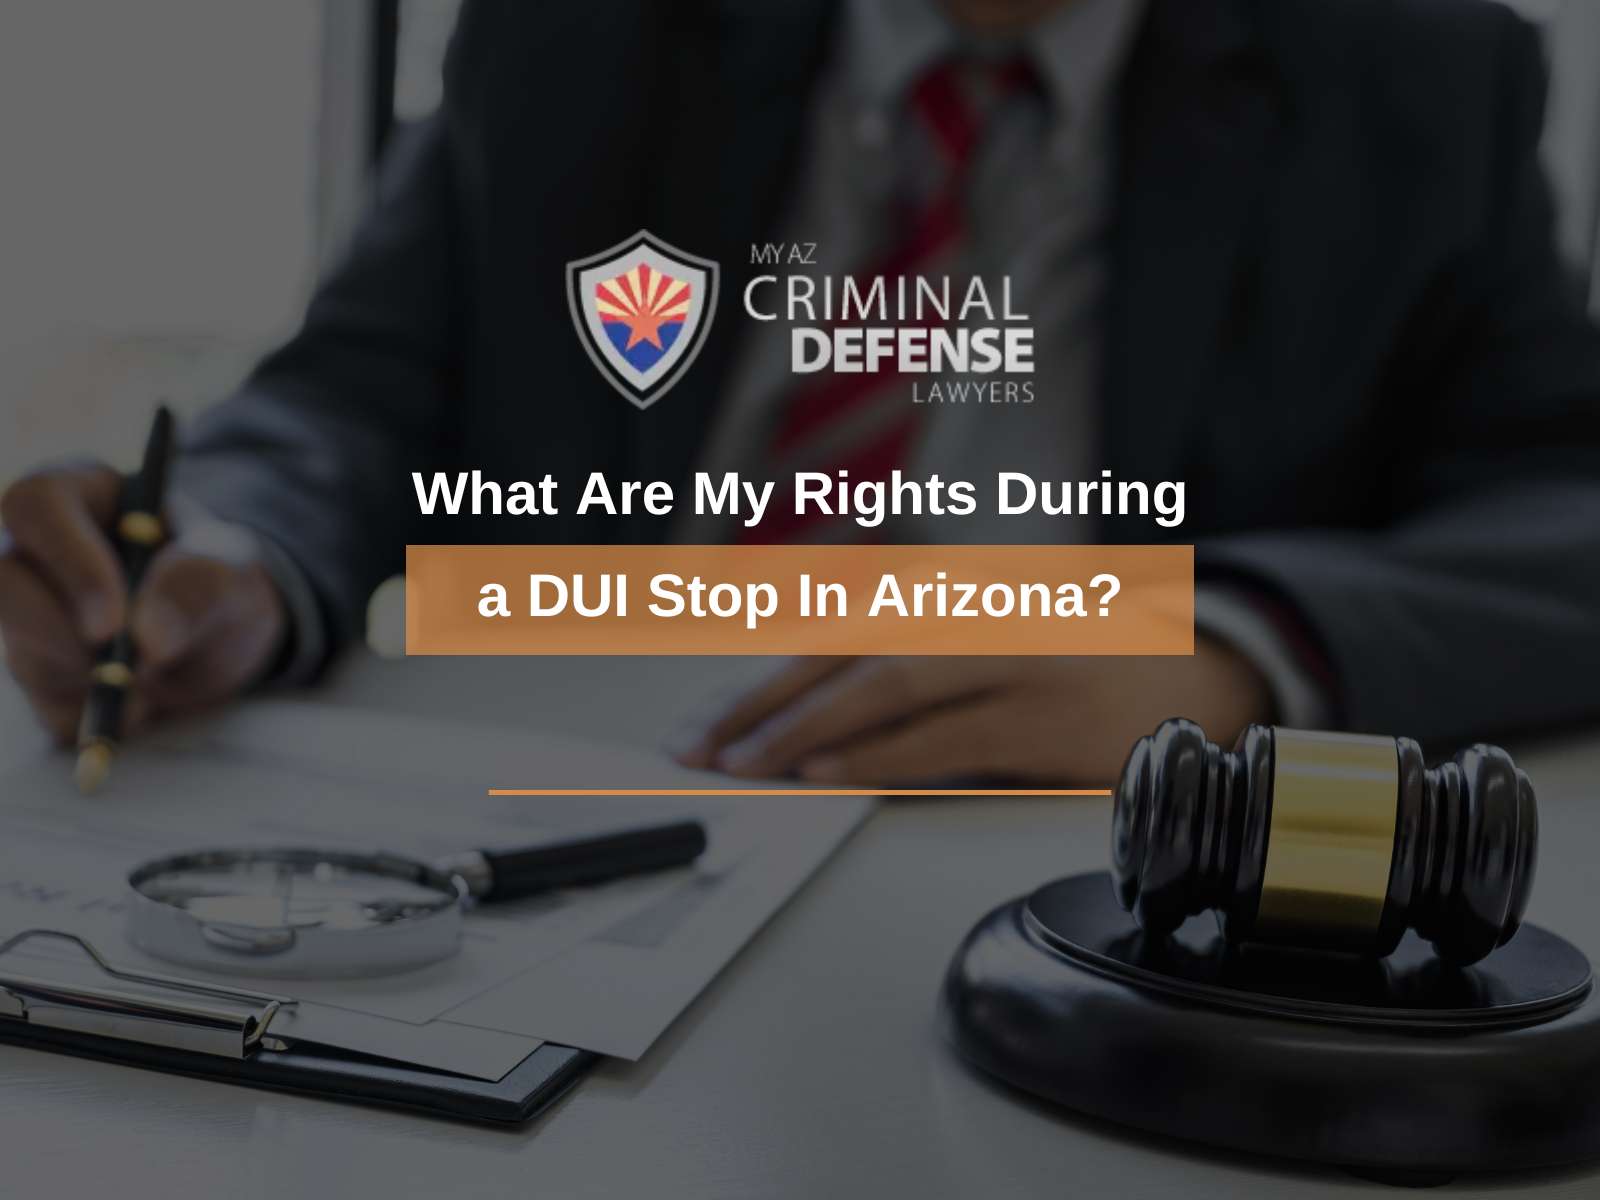 What Are My Rights During a DUI Stop In Arizona